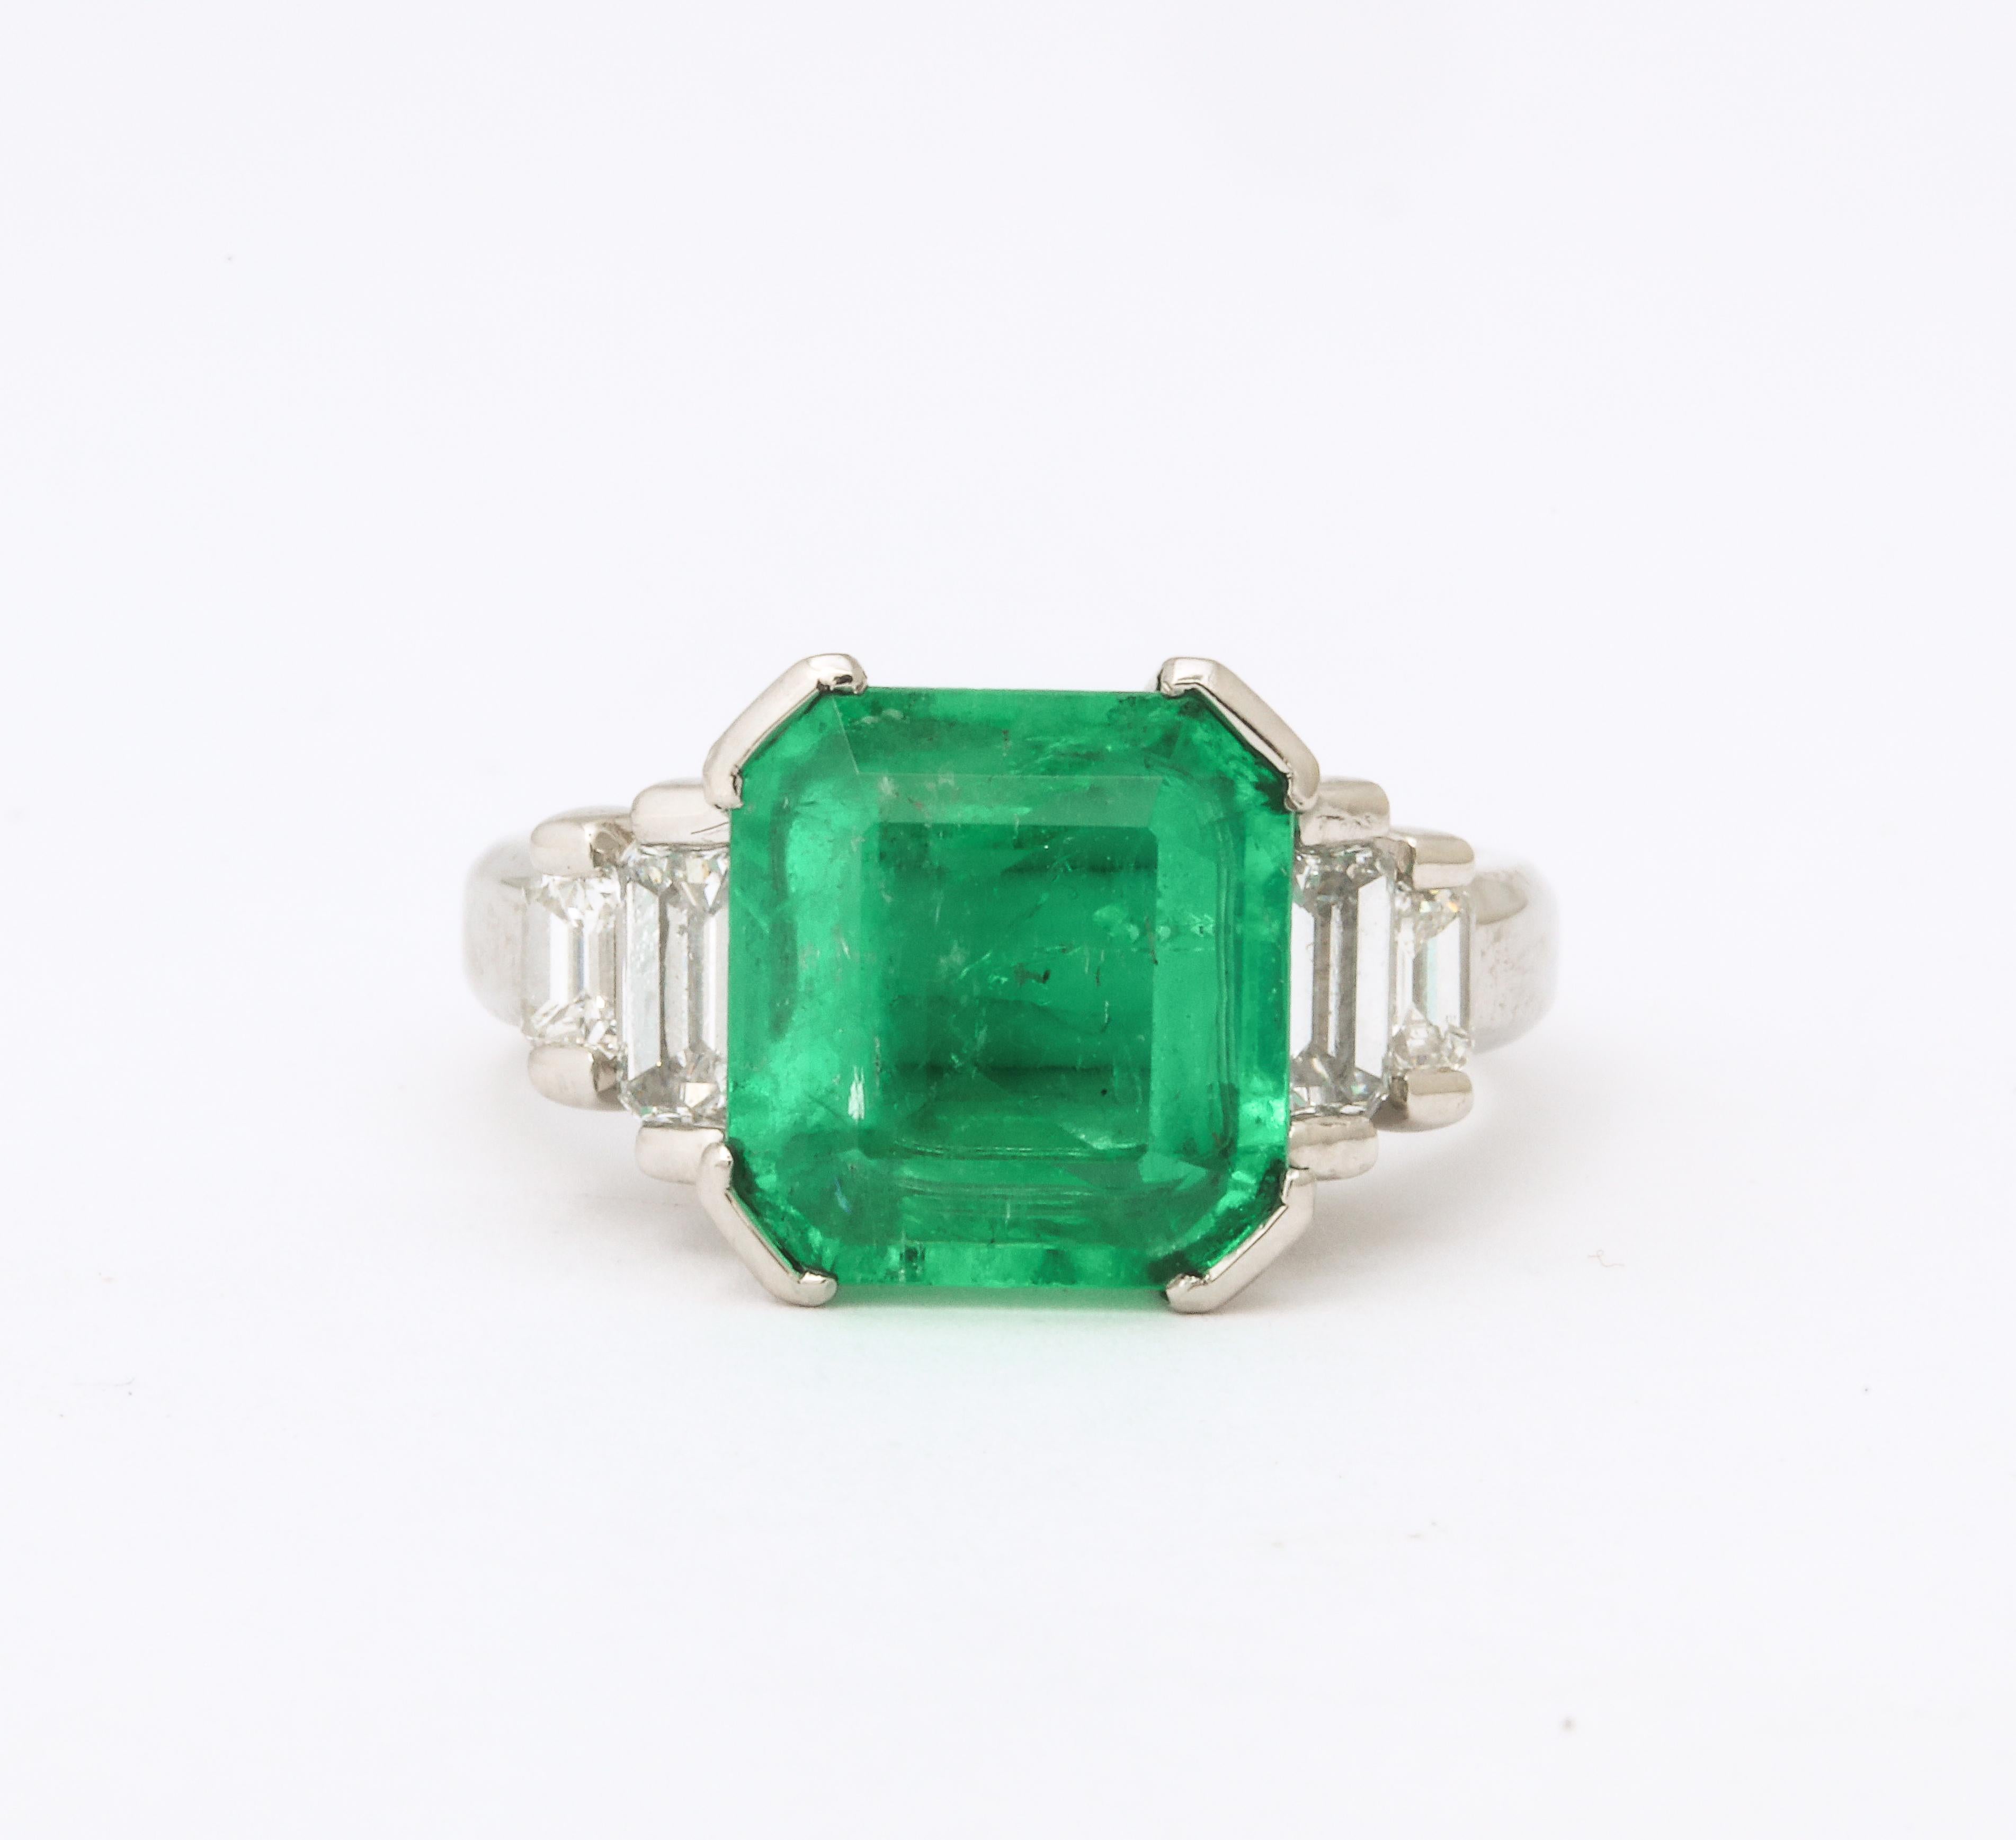 One Ladies Platinum Centering A 4.68 Carat Asscher Cut Emerald Origin Probably Colombian. Flanked By Four Stepdown Baguette Diamonds Weighing 1.01 Carats Total Weight. Crafted In America Circa 1960's.